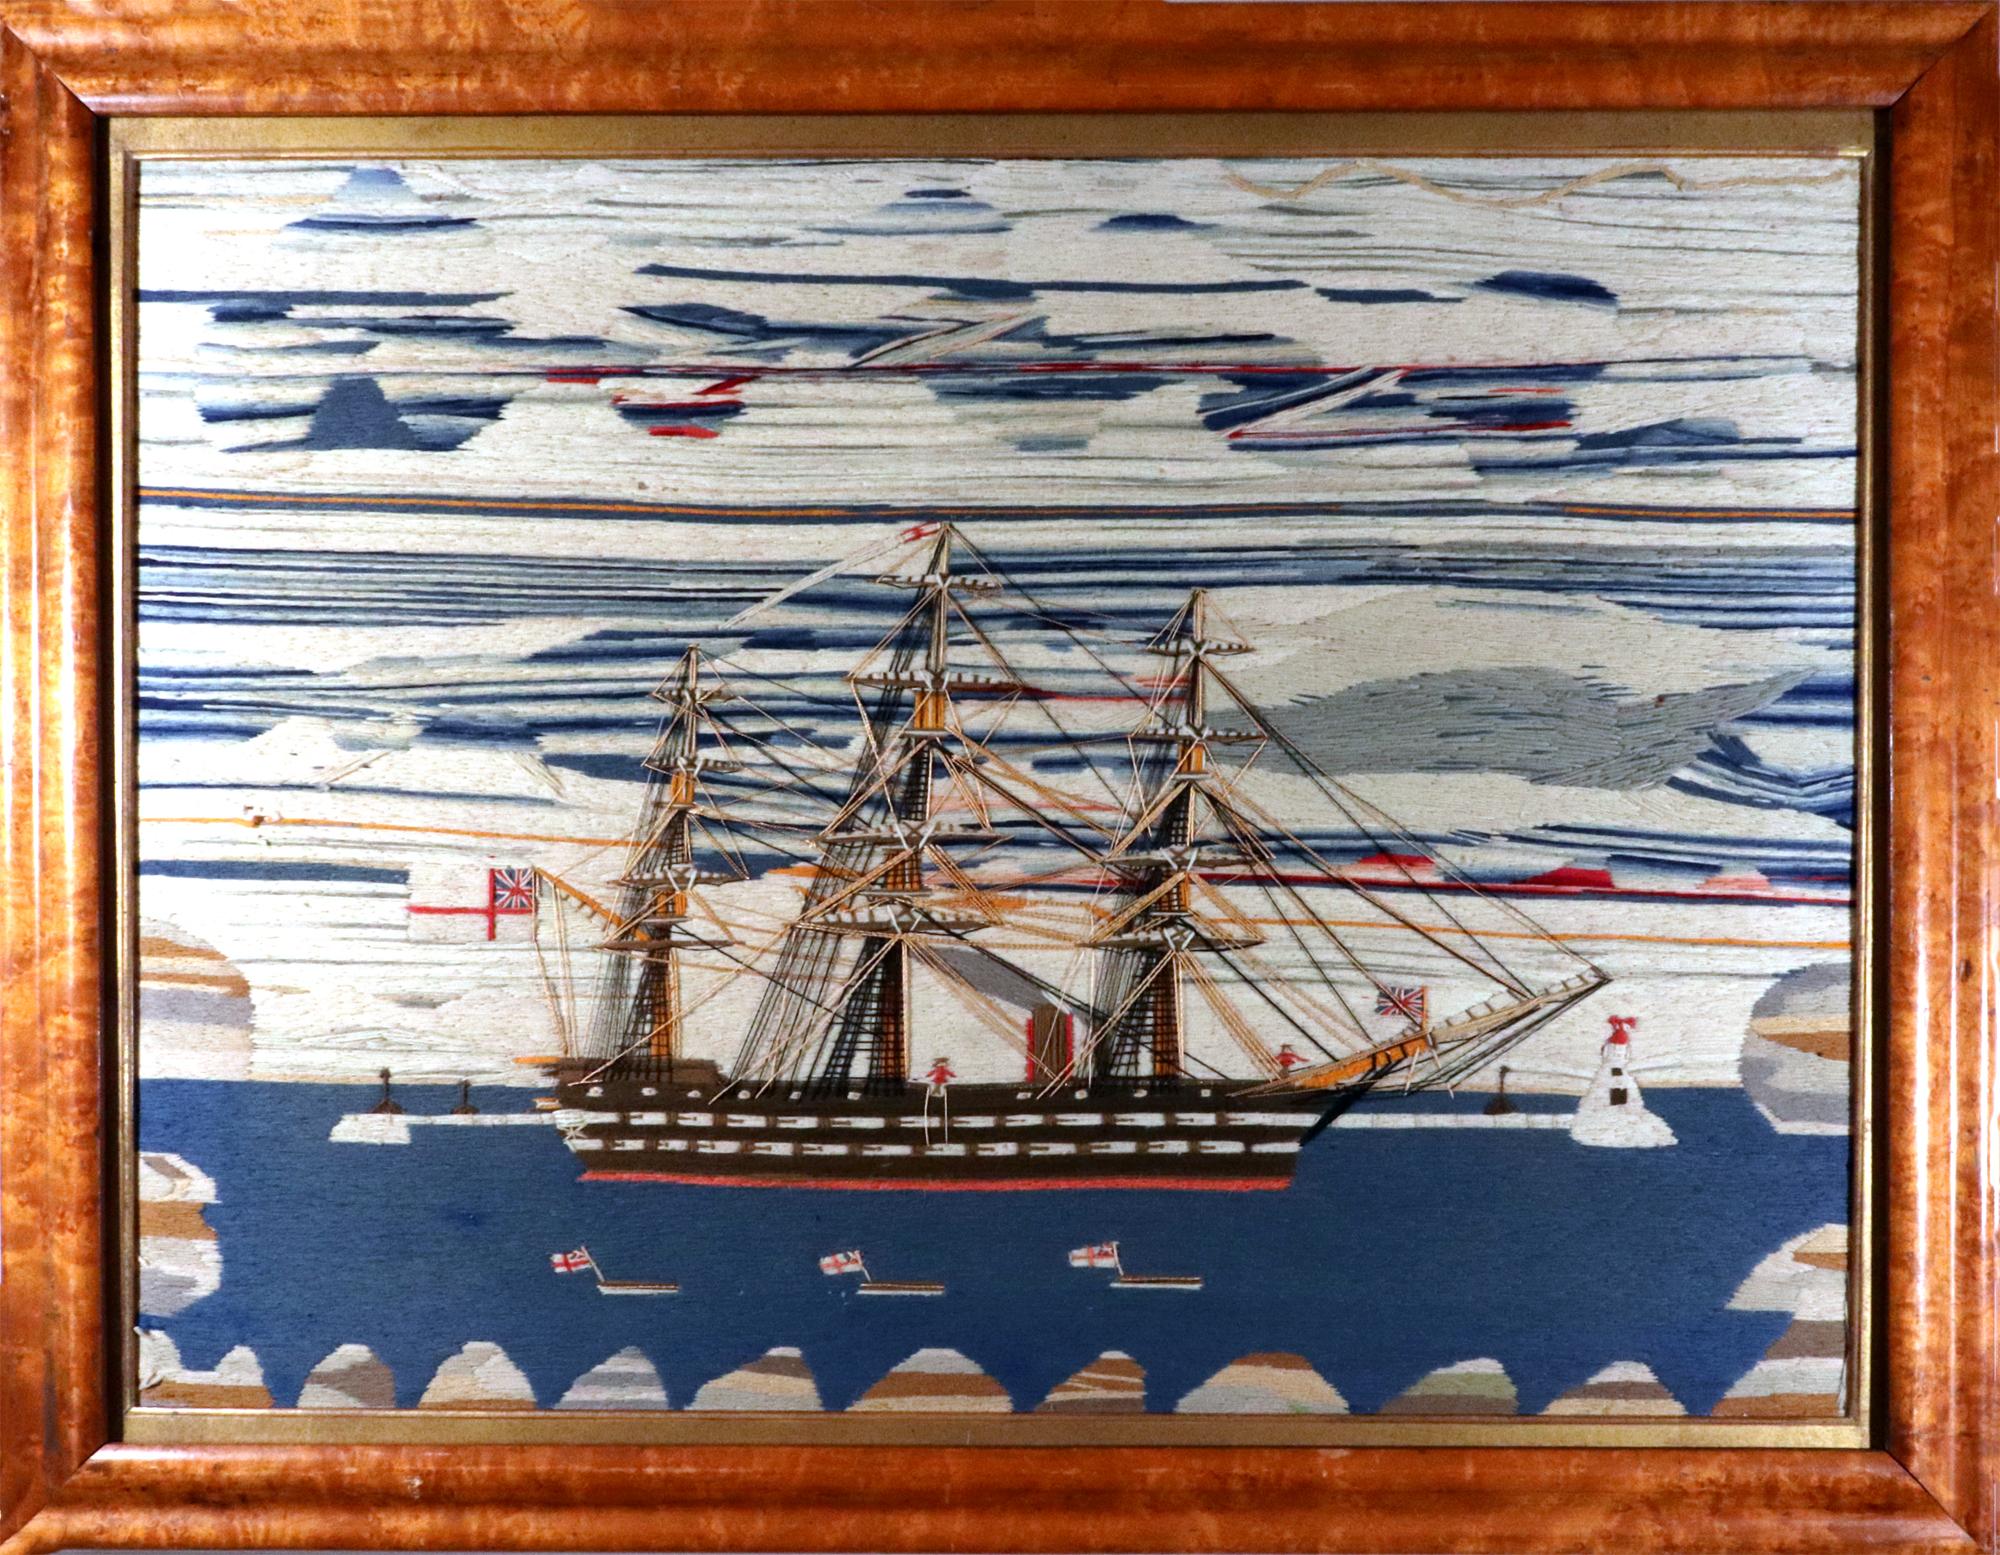 British Sailor's Woolwork of Royal Navy Ship,
Circa 1865

The large sailor's woolwork depicts a British Royal Navy Second Rate Ship anchored in a bay, her sails furled. She flies the White Ensign and a long white banner from her Main mast. The